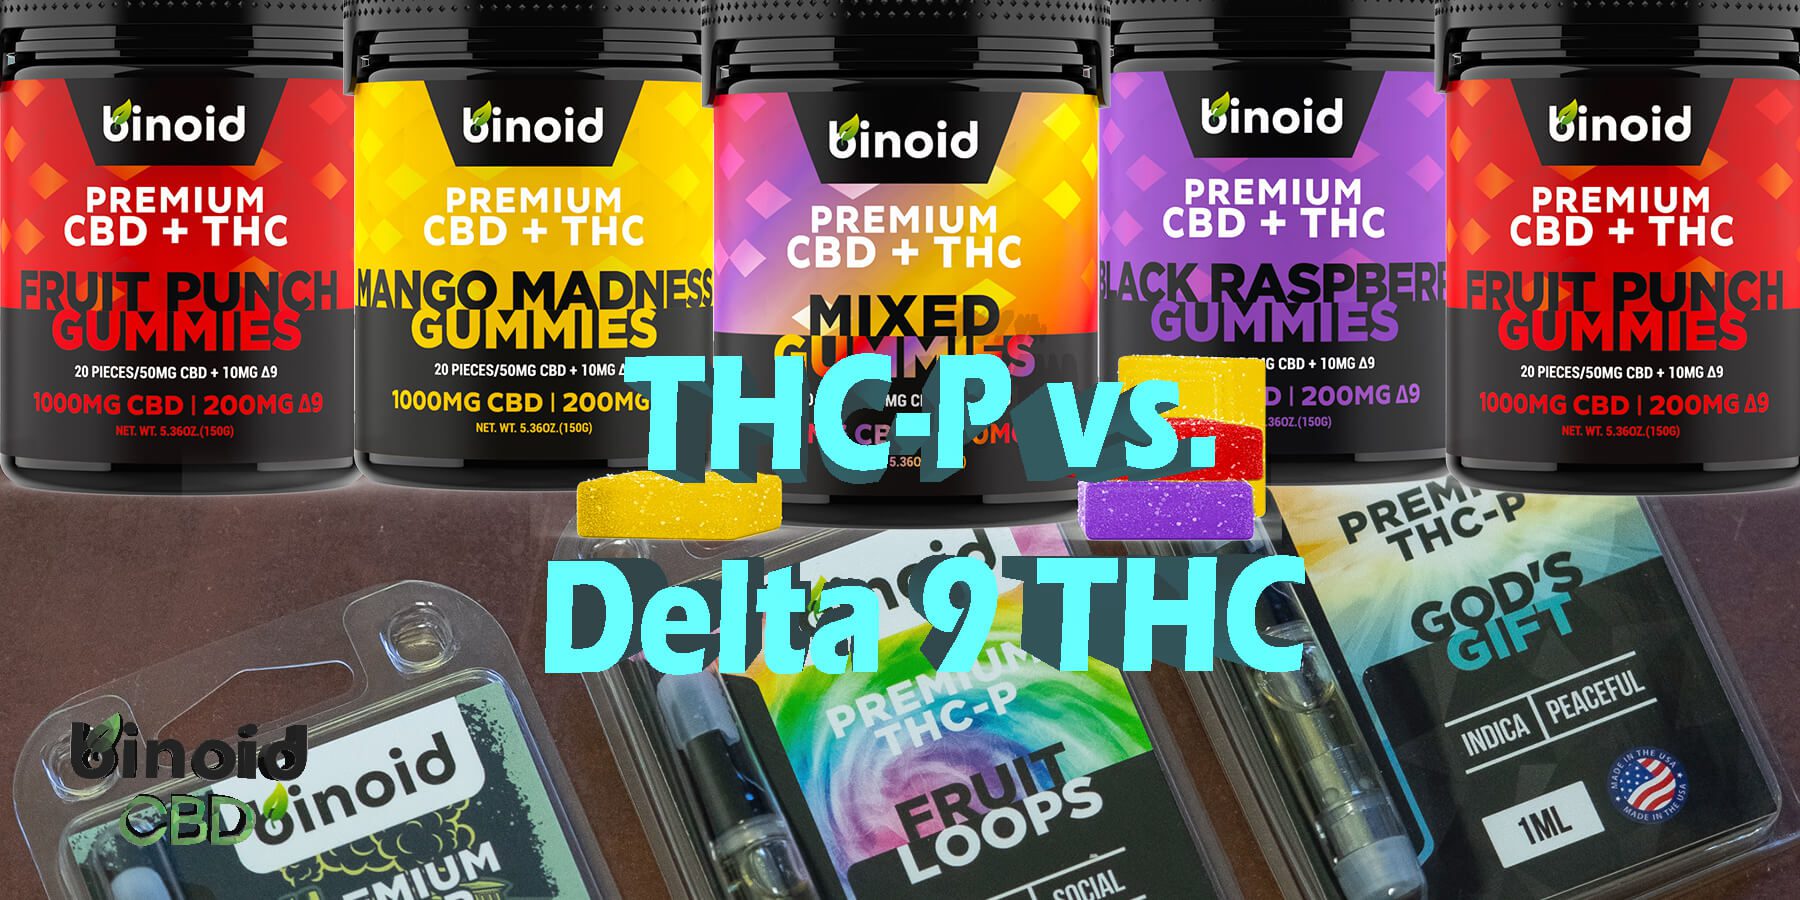 What's The Difference Between THC-P and Delta 9 THC?